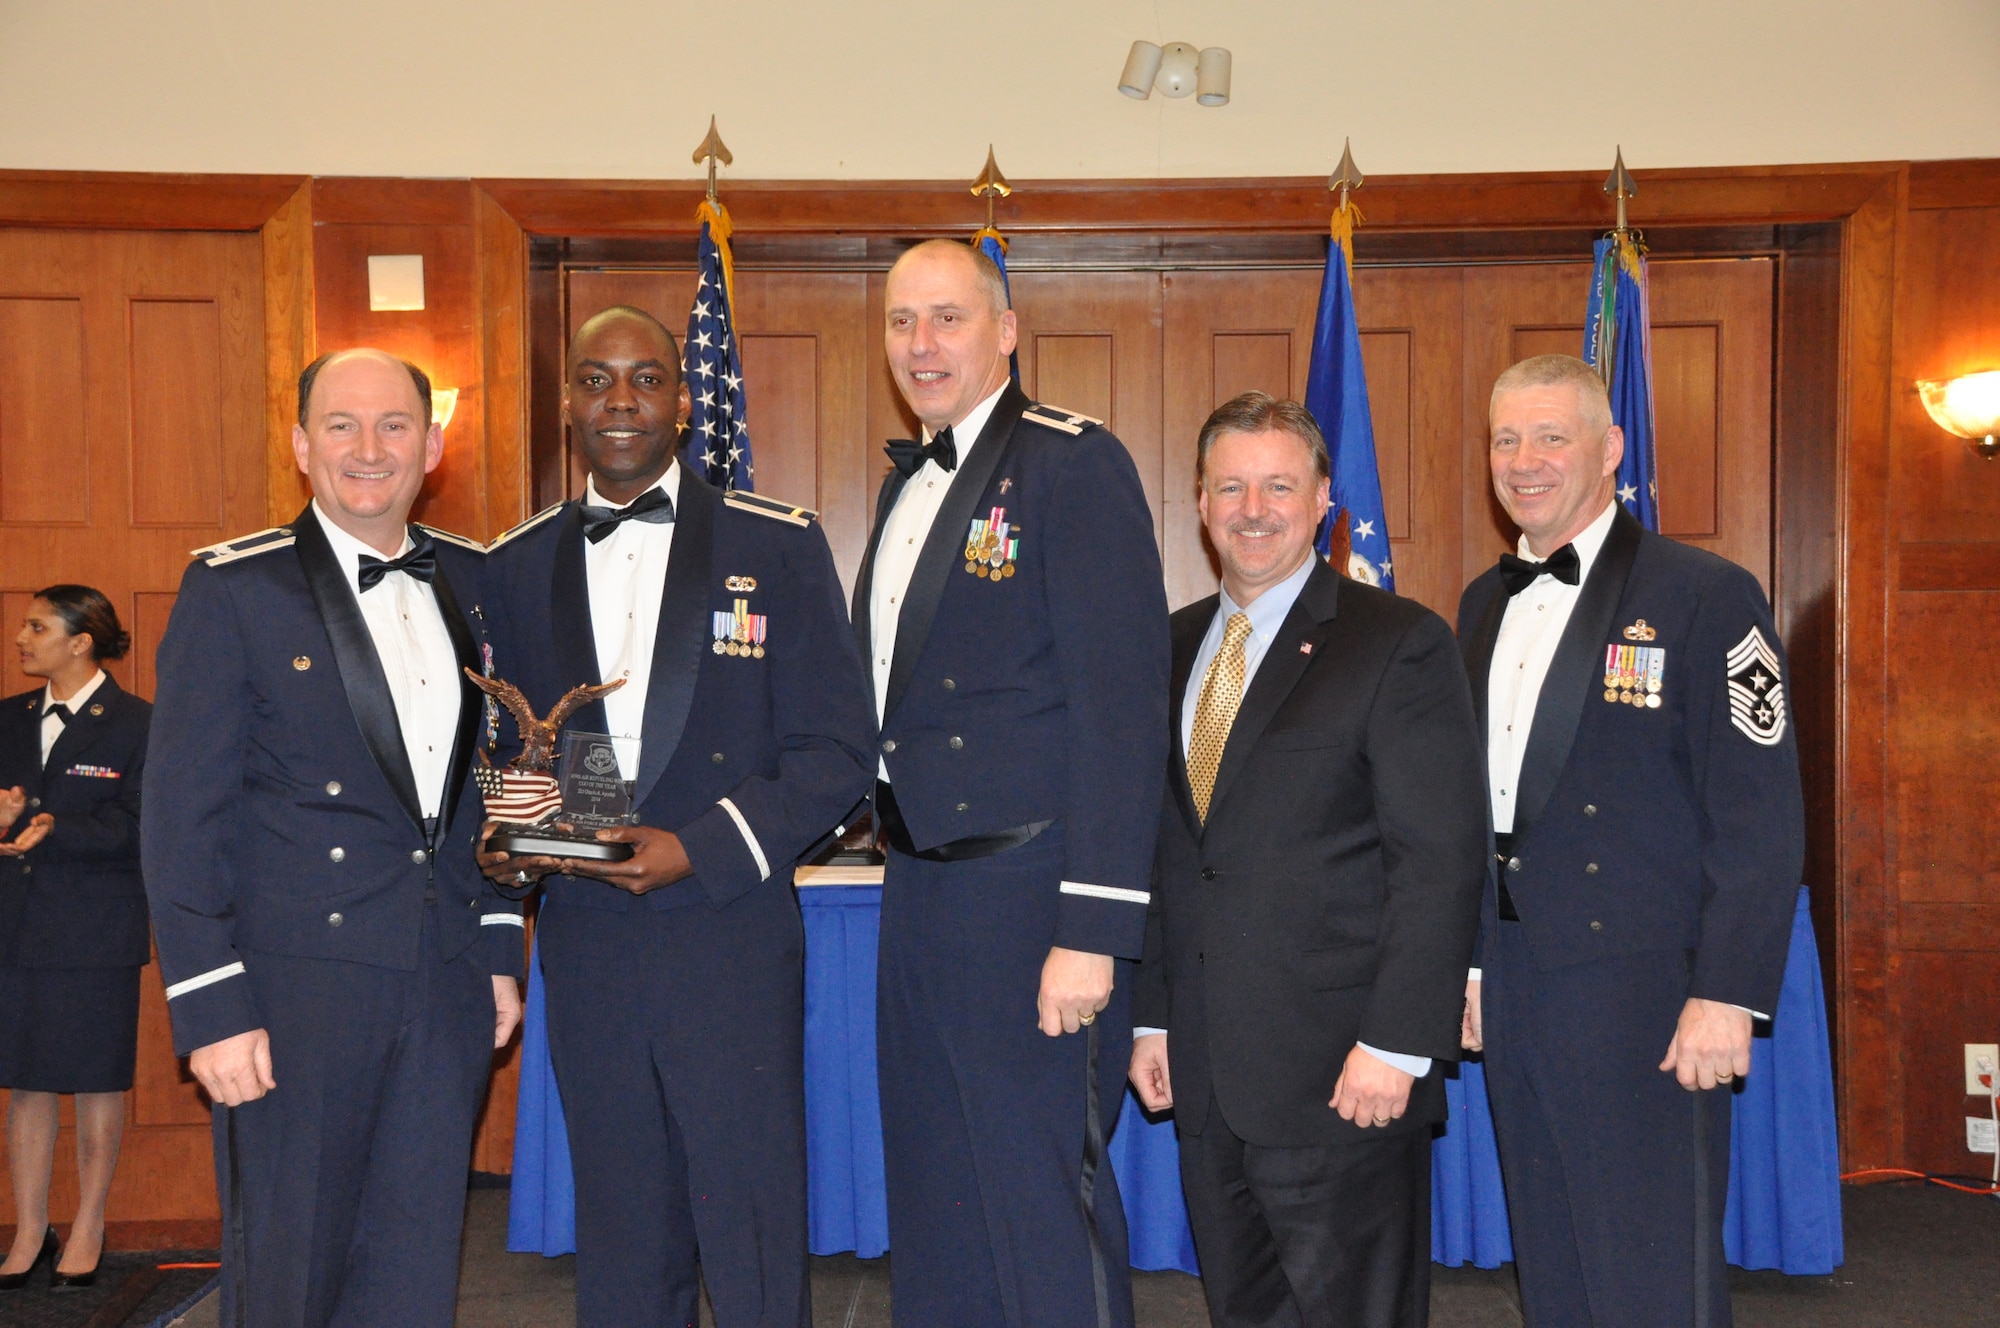 Second Lieutenant Olaolu Ayodeji, 69th Aerial Port Squadron, wins the Company Grade Officer of the Year award at the 459 ARW Annual Awards Banquet on Saturday, March 7, 2015. (Air Force Photo / SrA Kristin Kurtz)